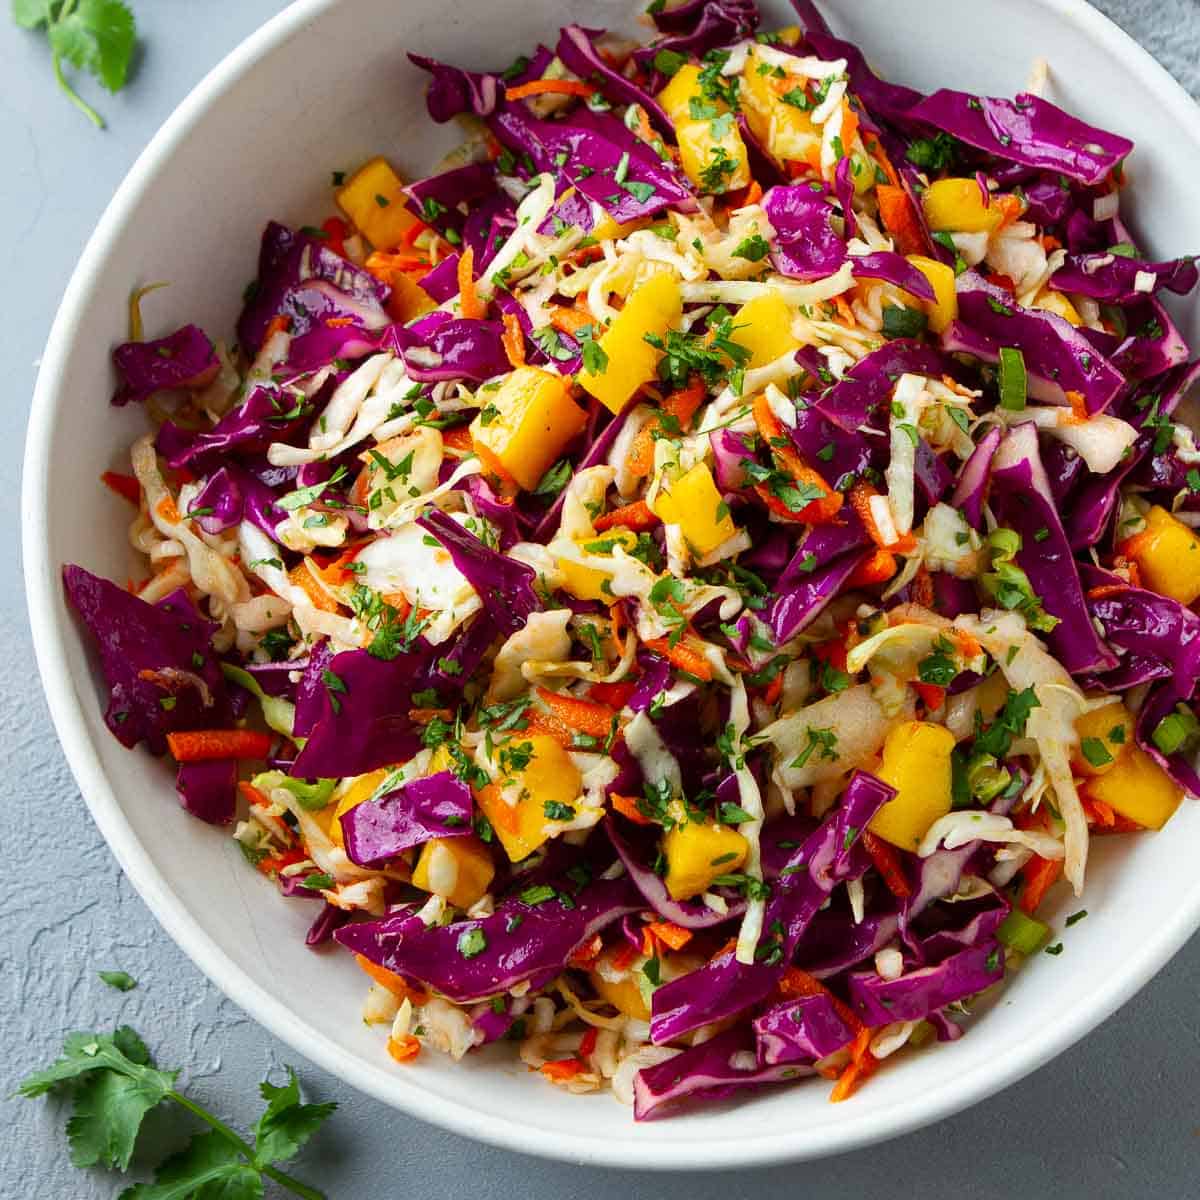 Green and purple cabbage slaw with mango in a white bowl.